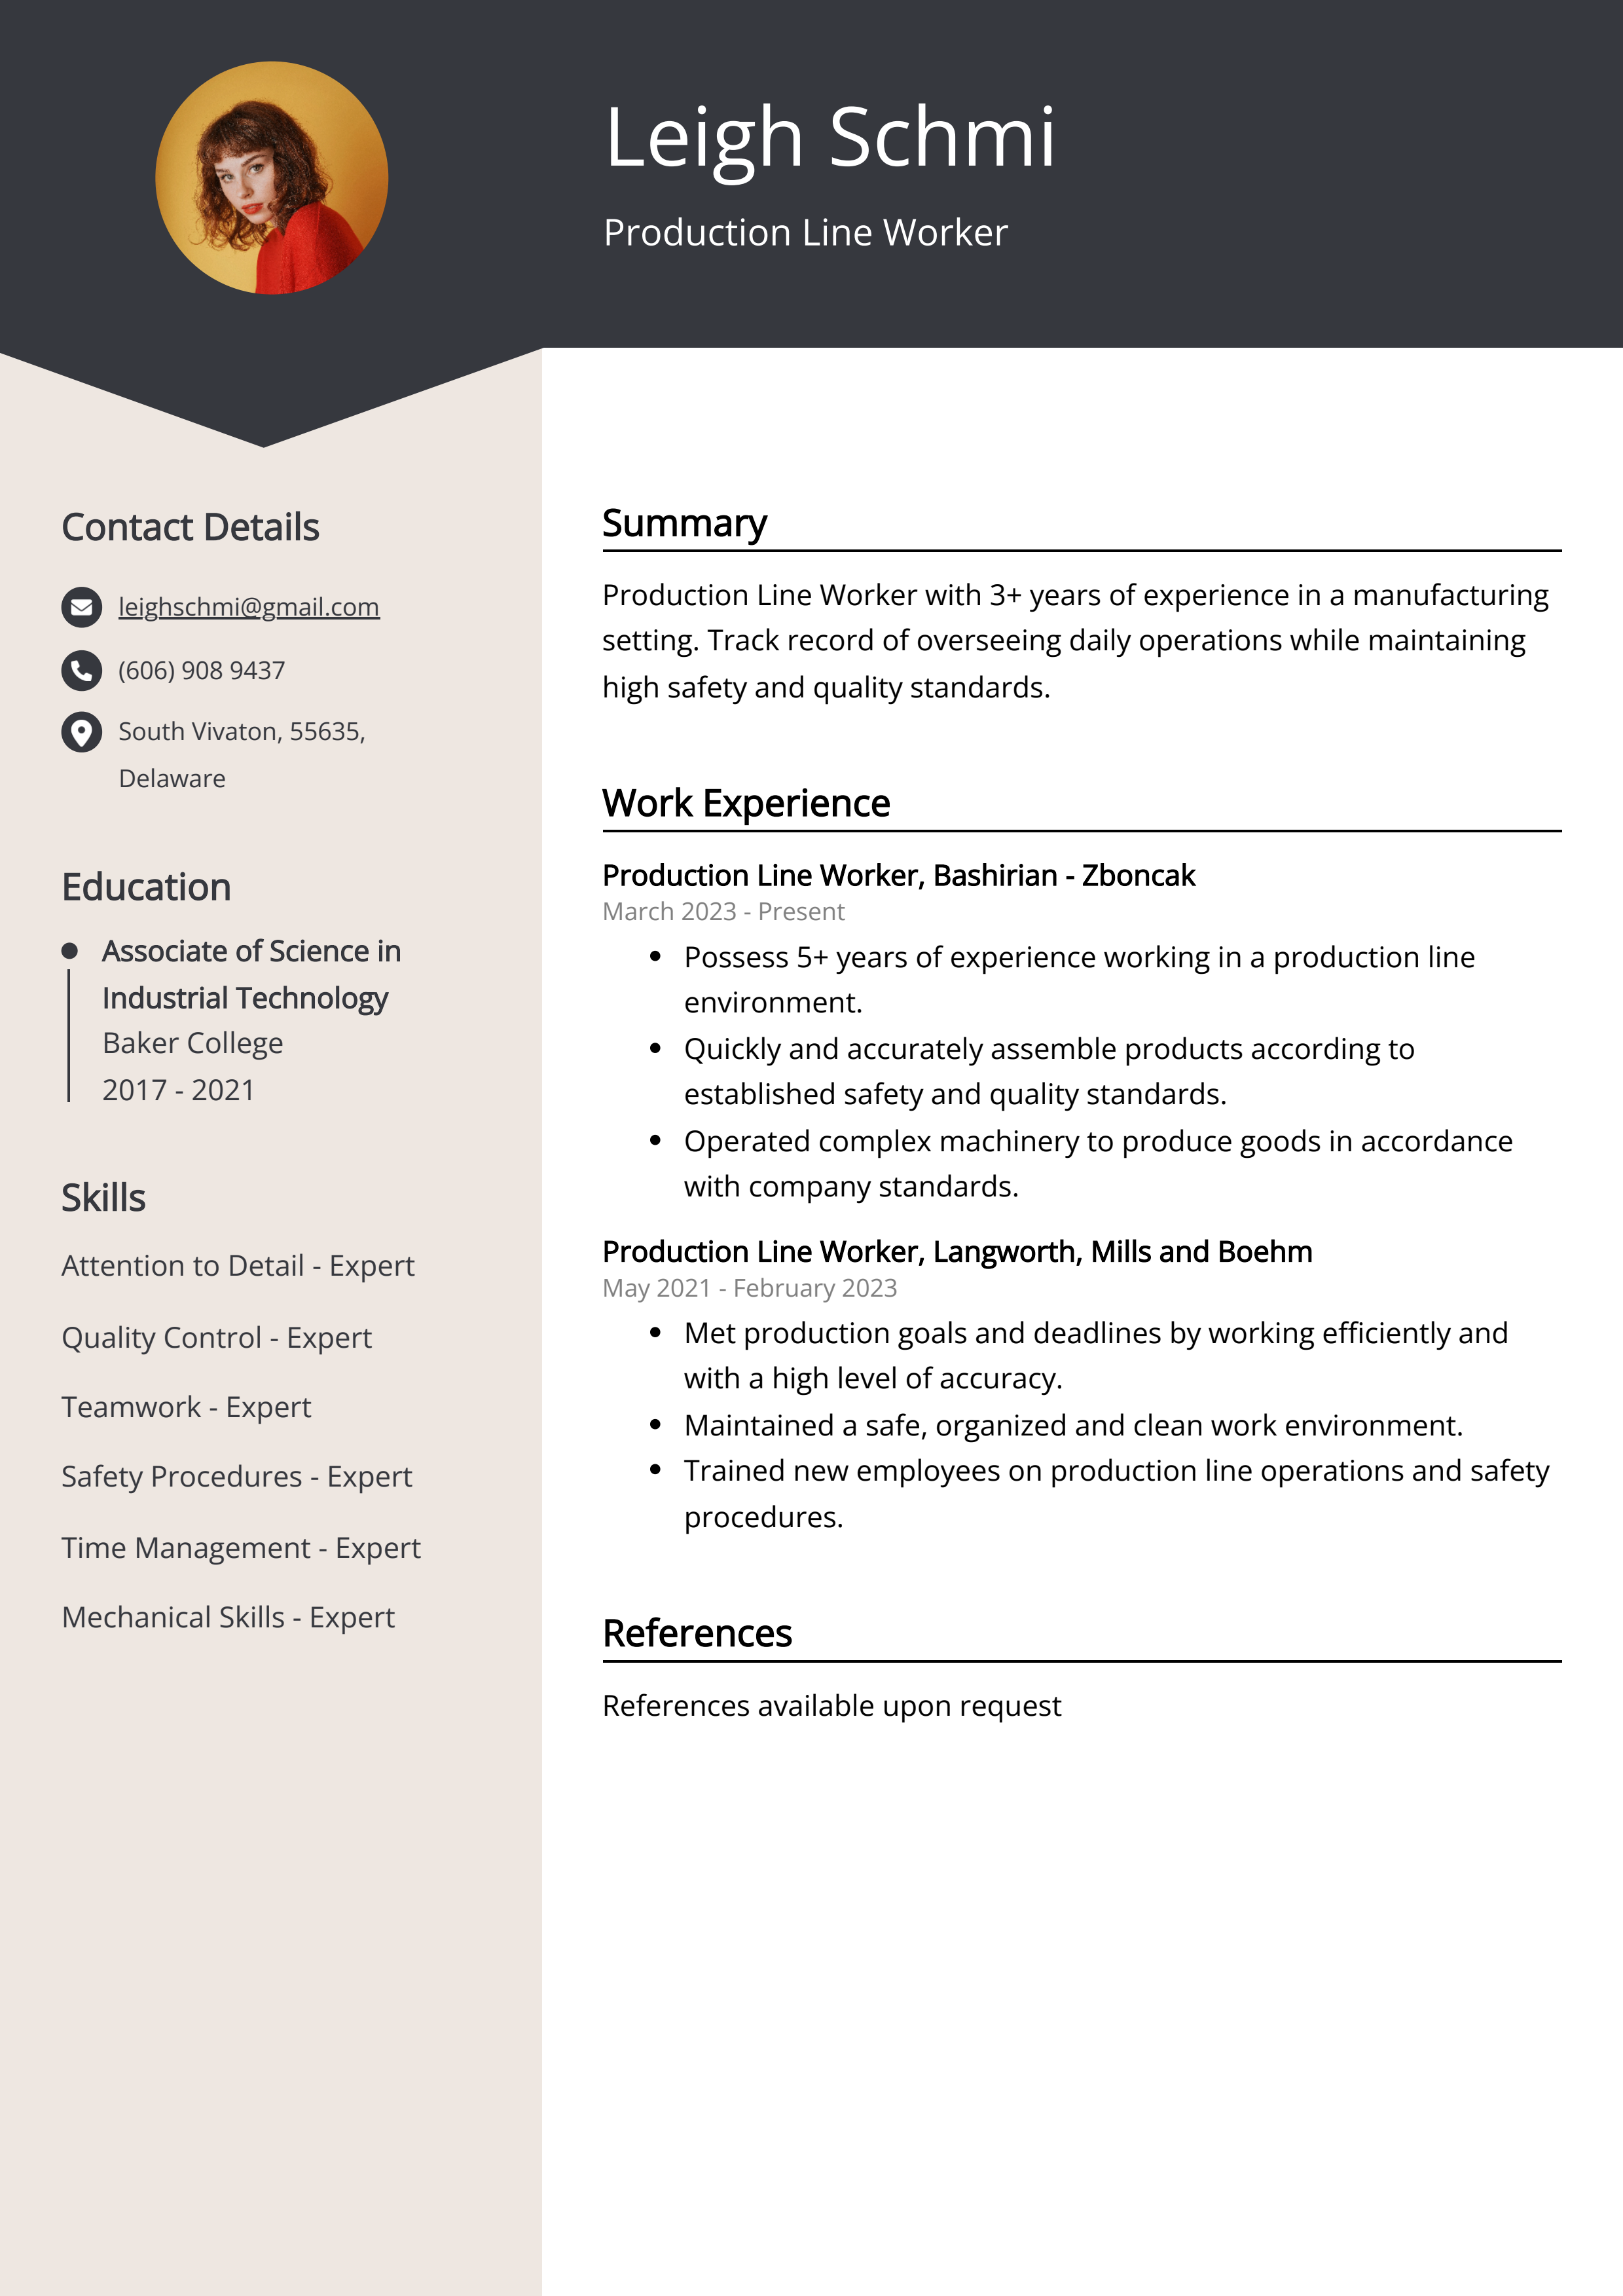 Production Line Worker CV Example